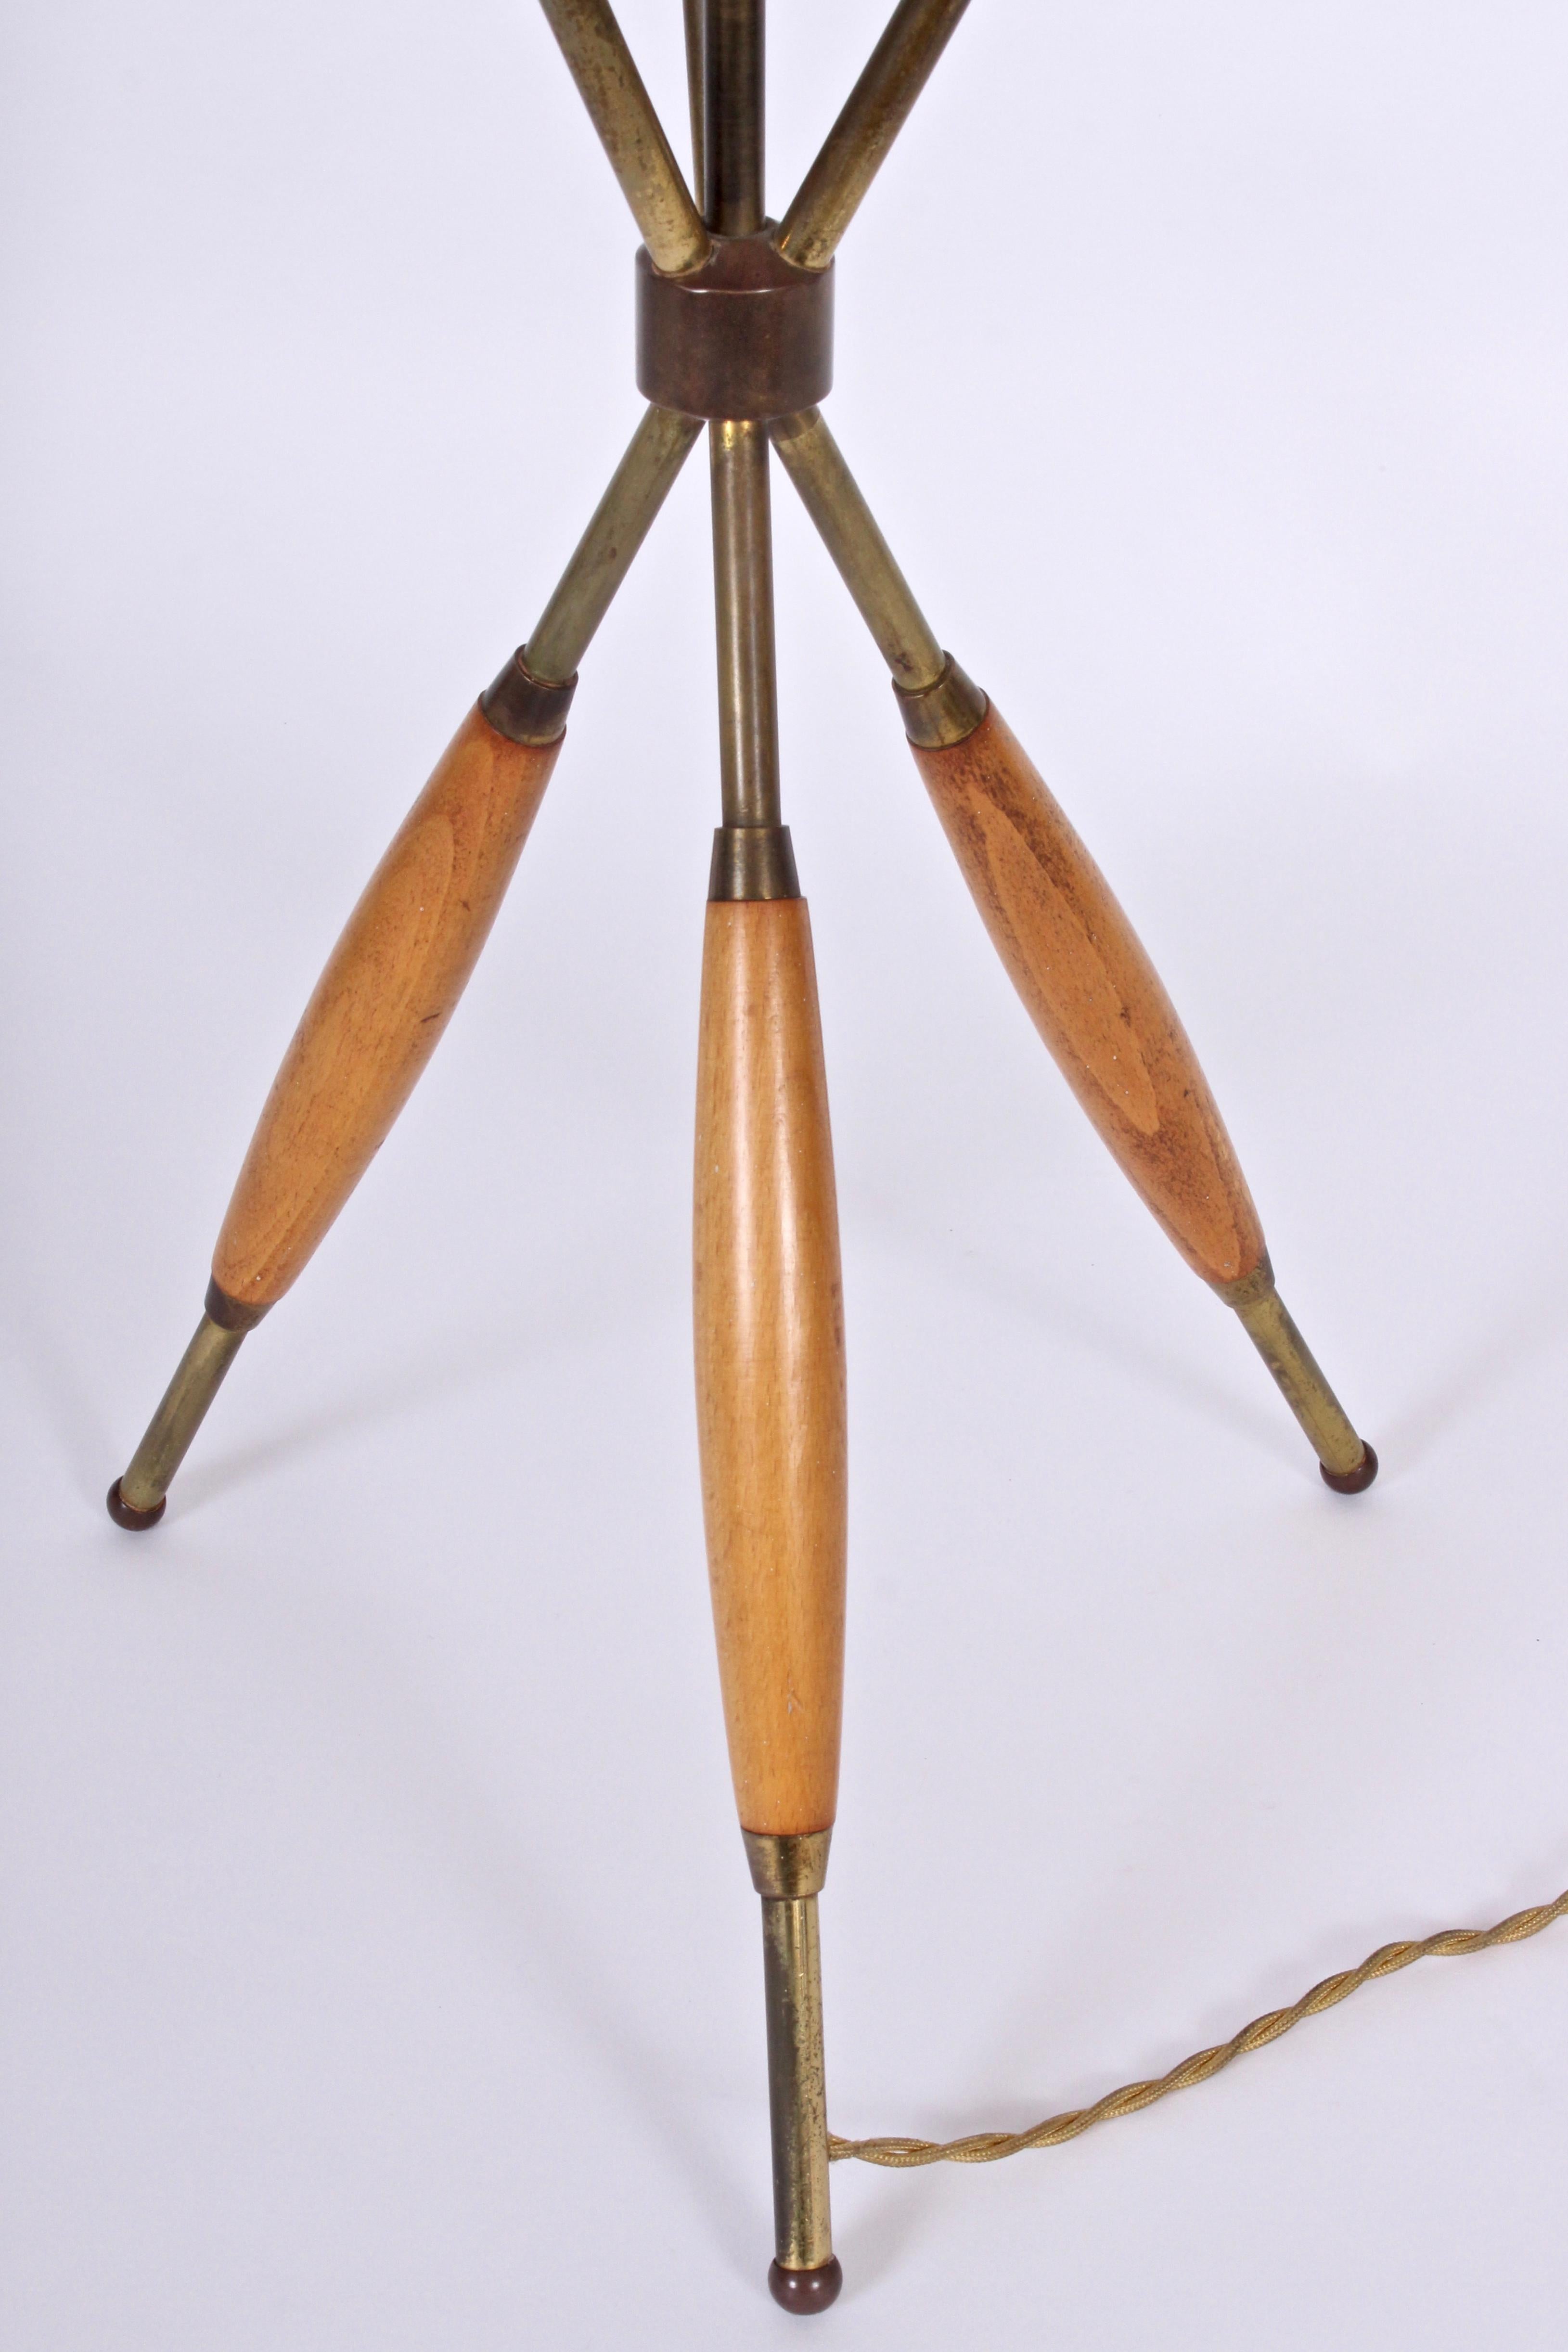 Plated Gerald Thurston for Lightolier Brass and Walnut Tripod Table Lamp, circa 1960